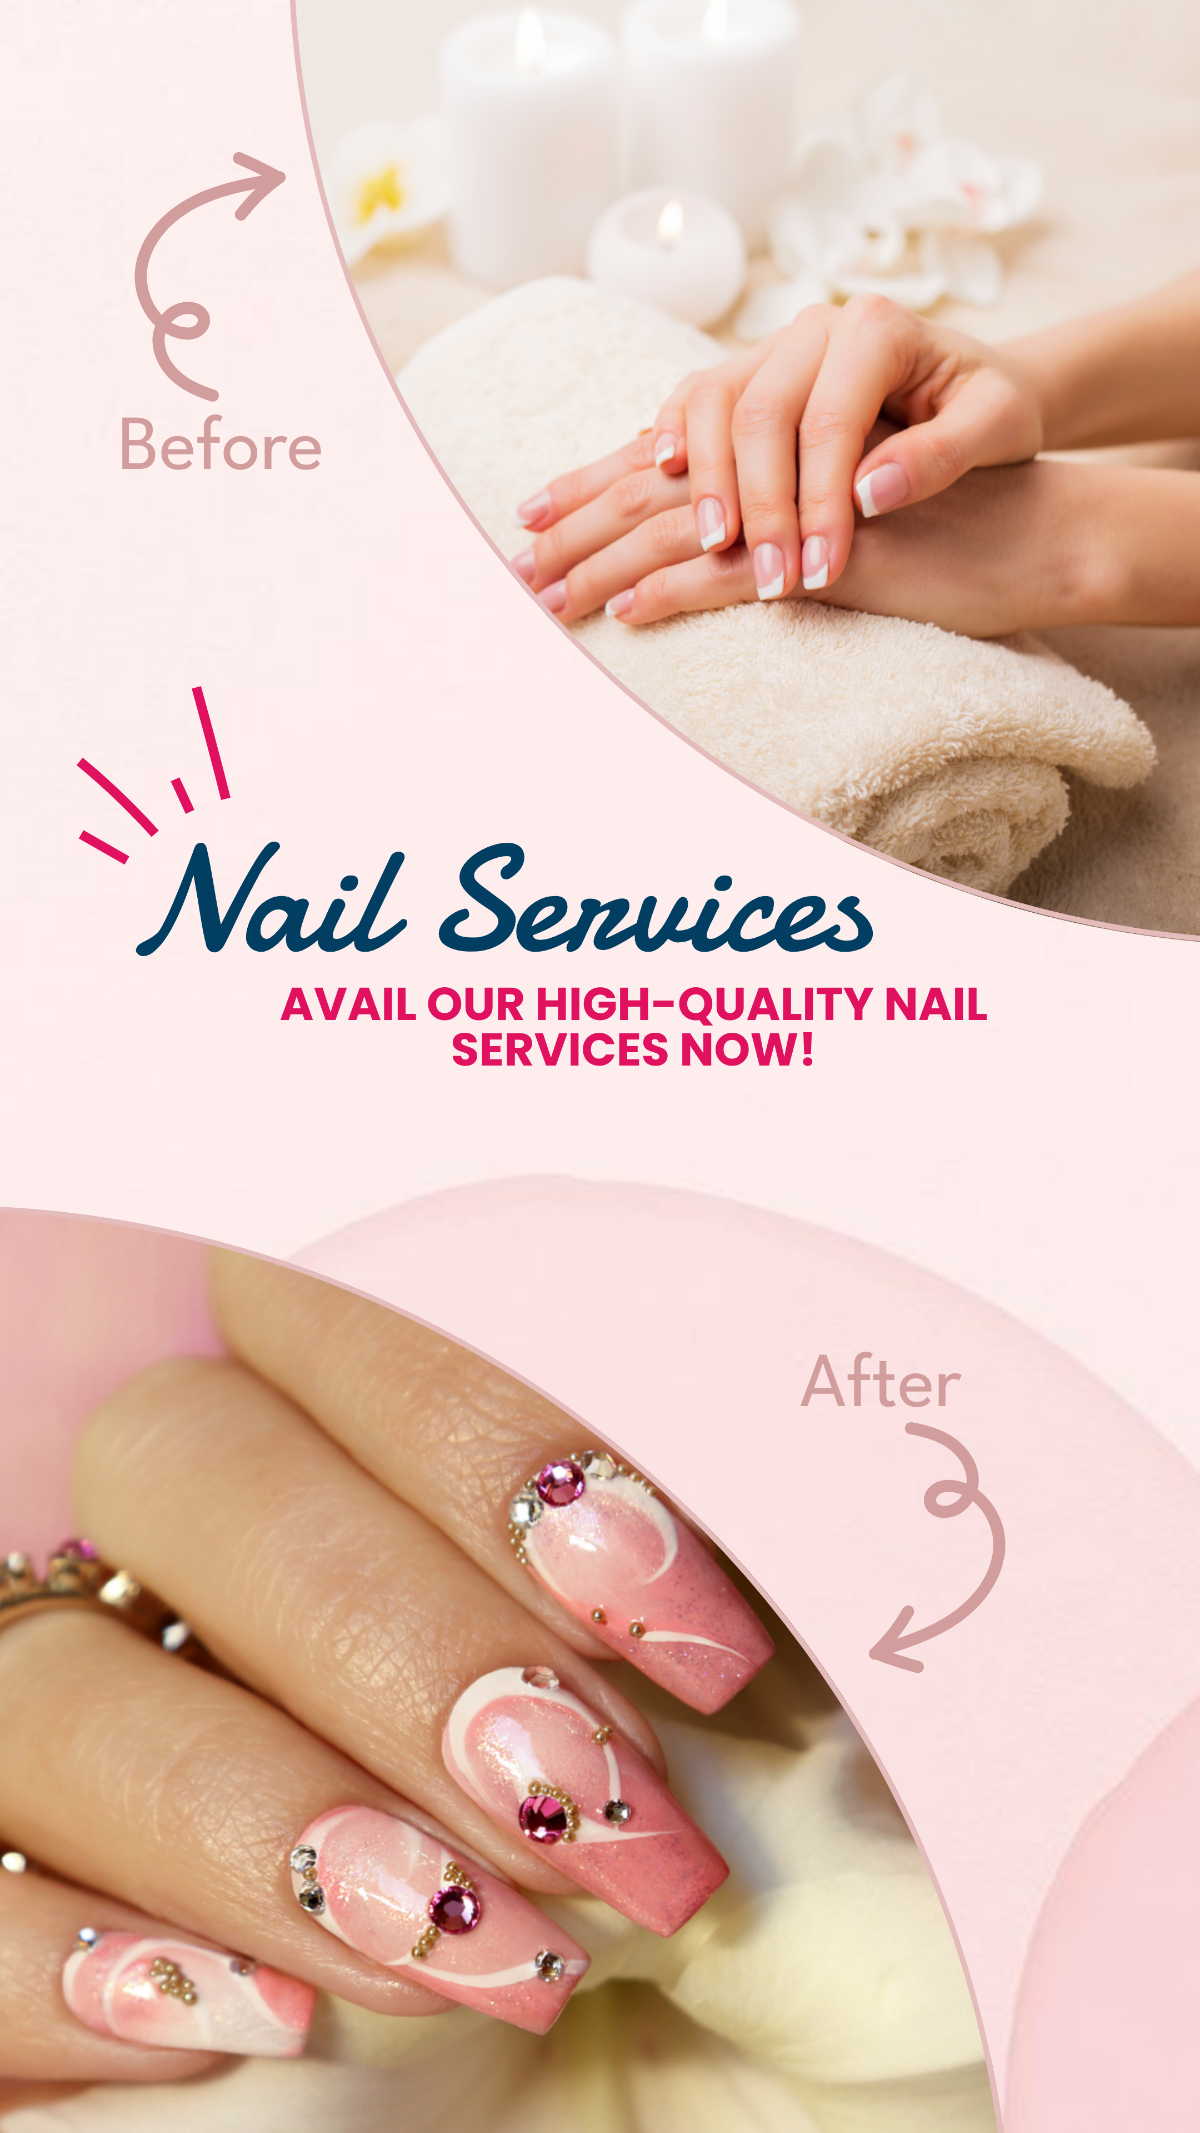 Nail Service Before and After Instagram Post